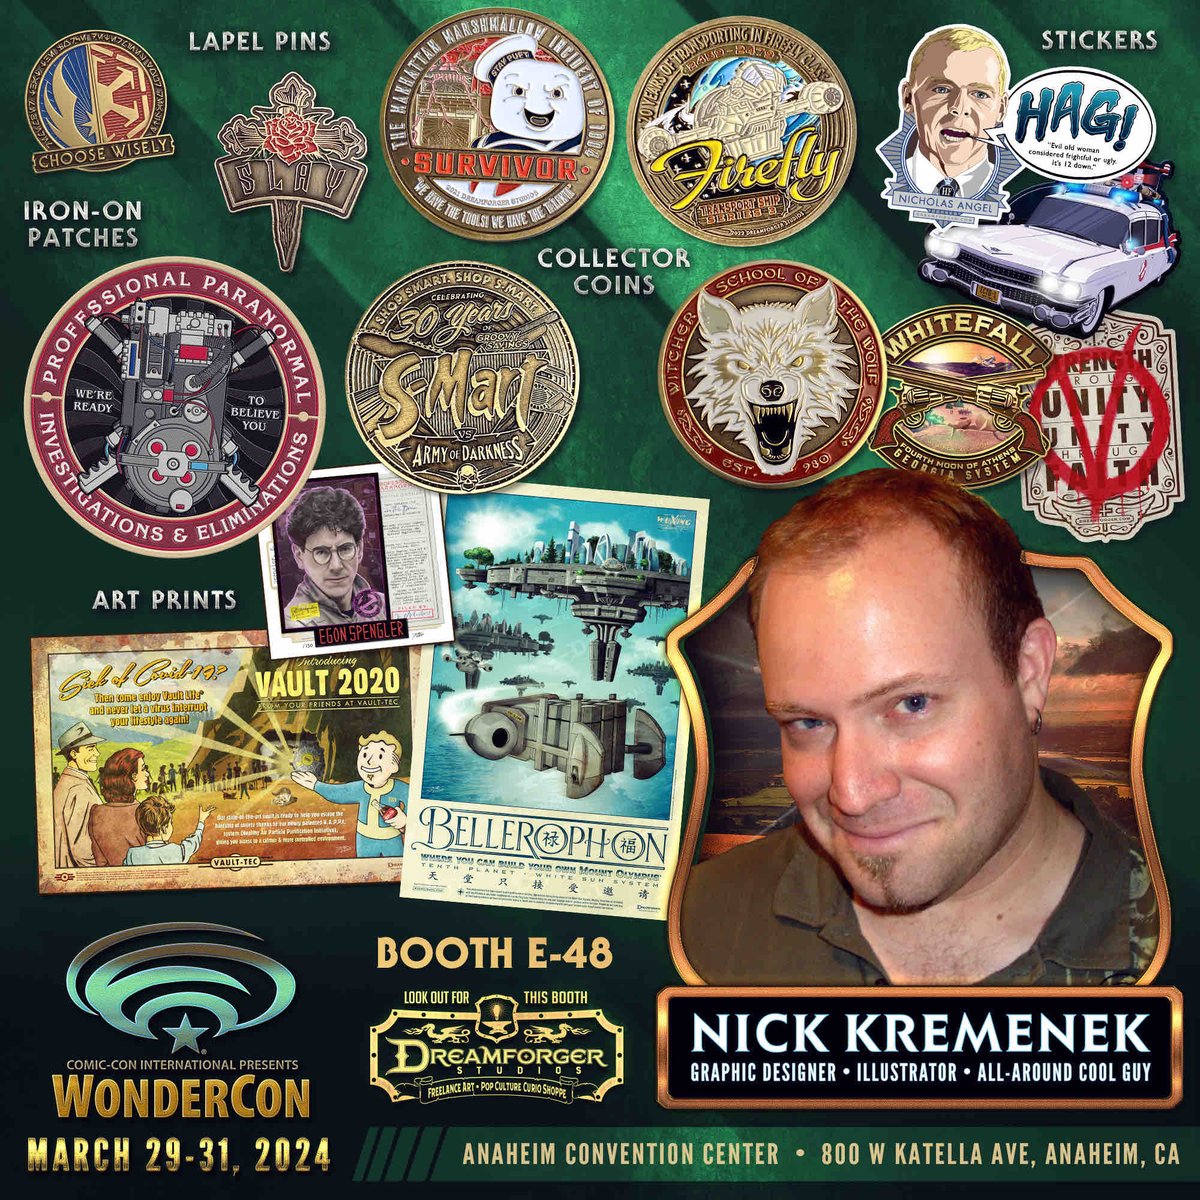 Its official! Thanks to many people donating to help, I have a booth and will be at WonderCon this weekend! Lots of new stuff so please stop by Booth E-48 in Artist’s Alley and say hi!
#WonderCon #NickKremenekArt #SupportArt